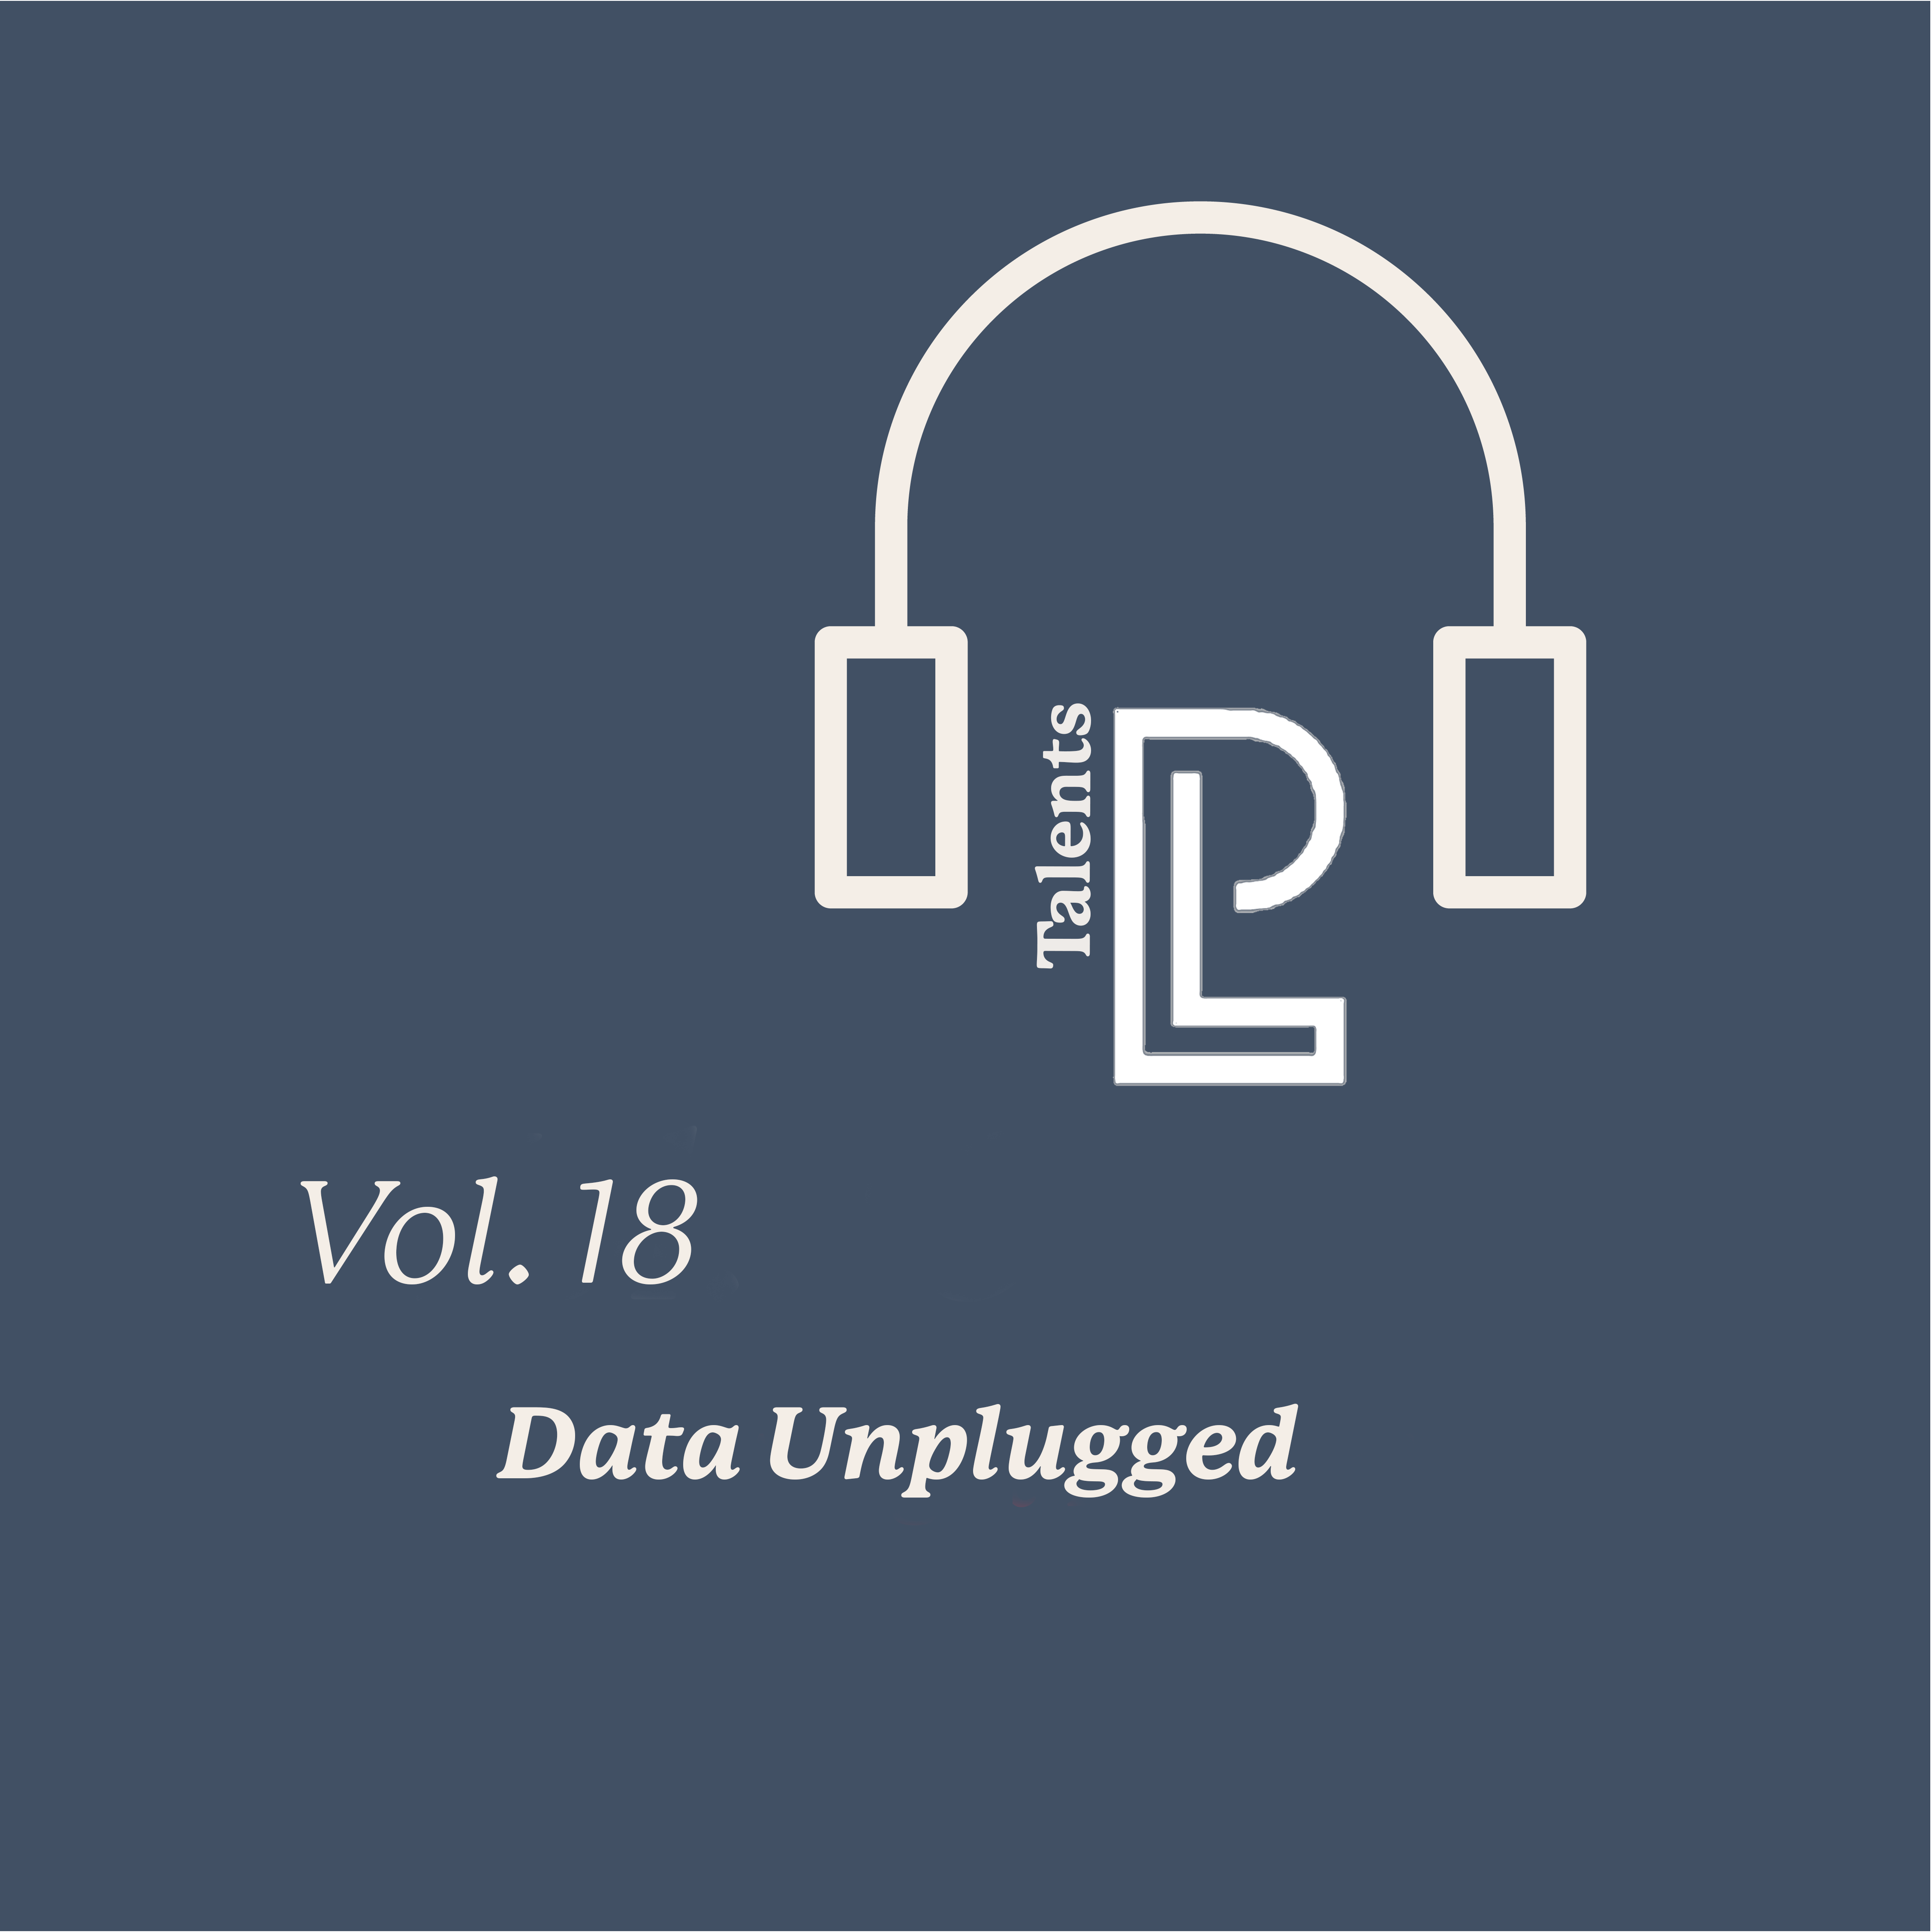 Data Unplugged, Episode 18: Phoenix group – integrated healthcare provider journey to becoming data driven